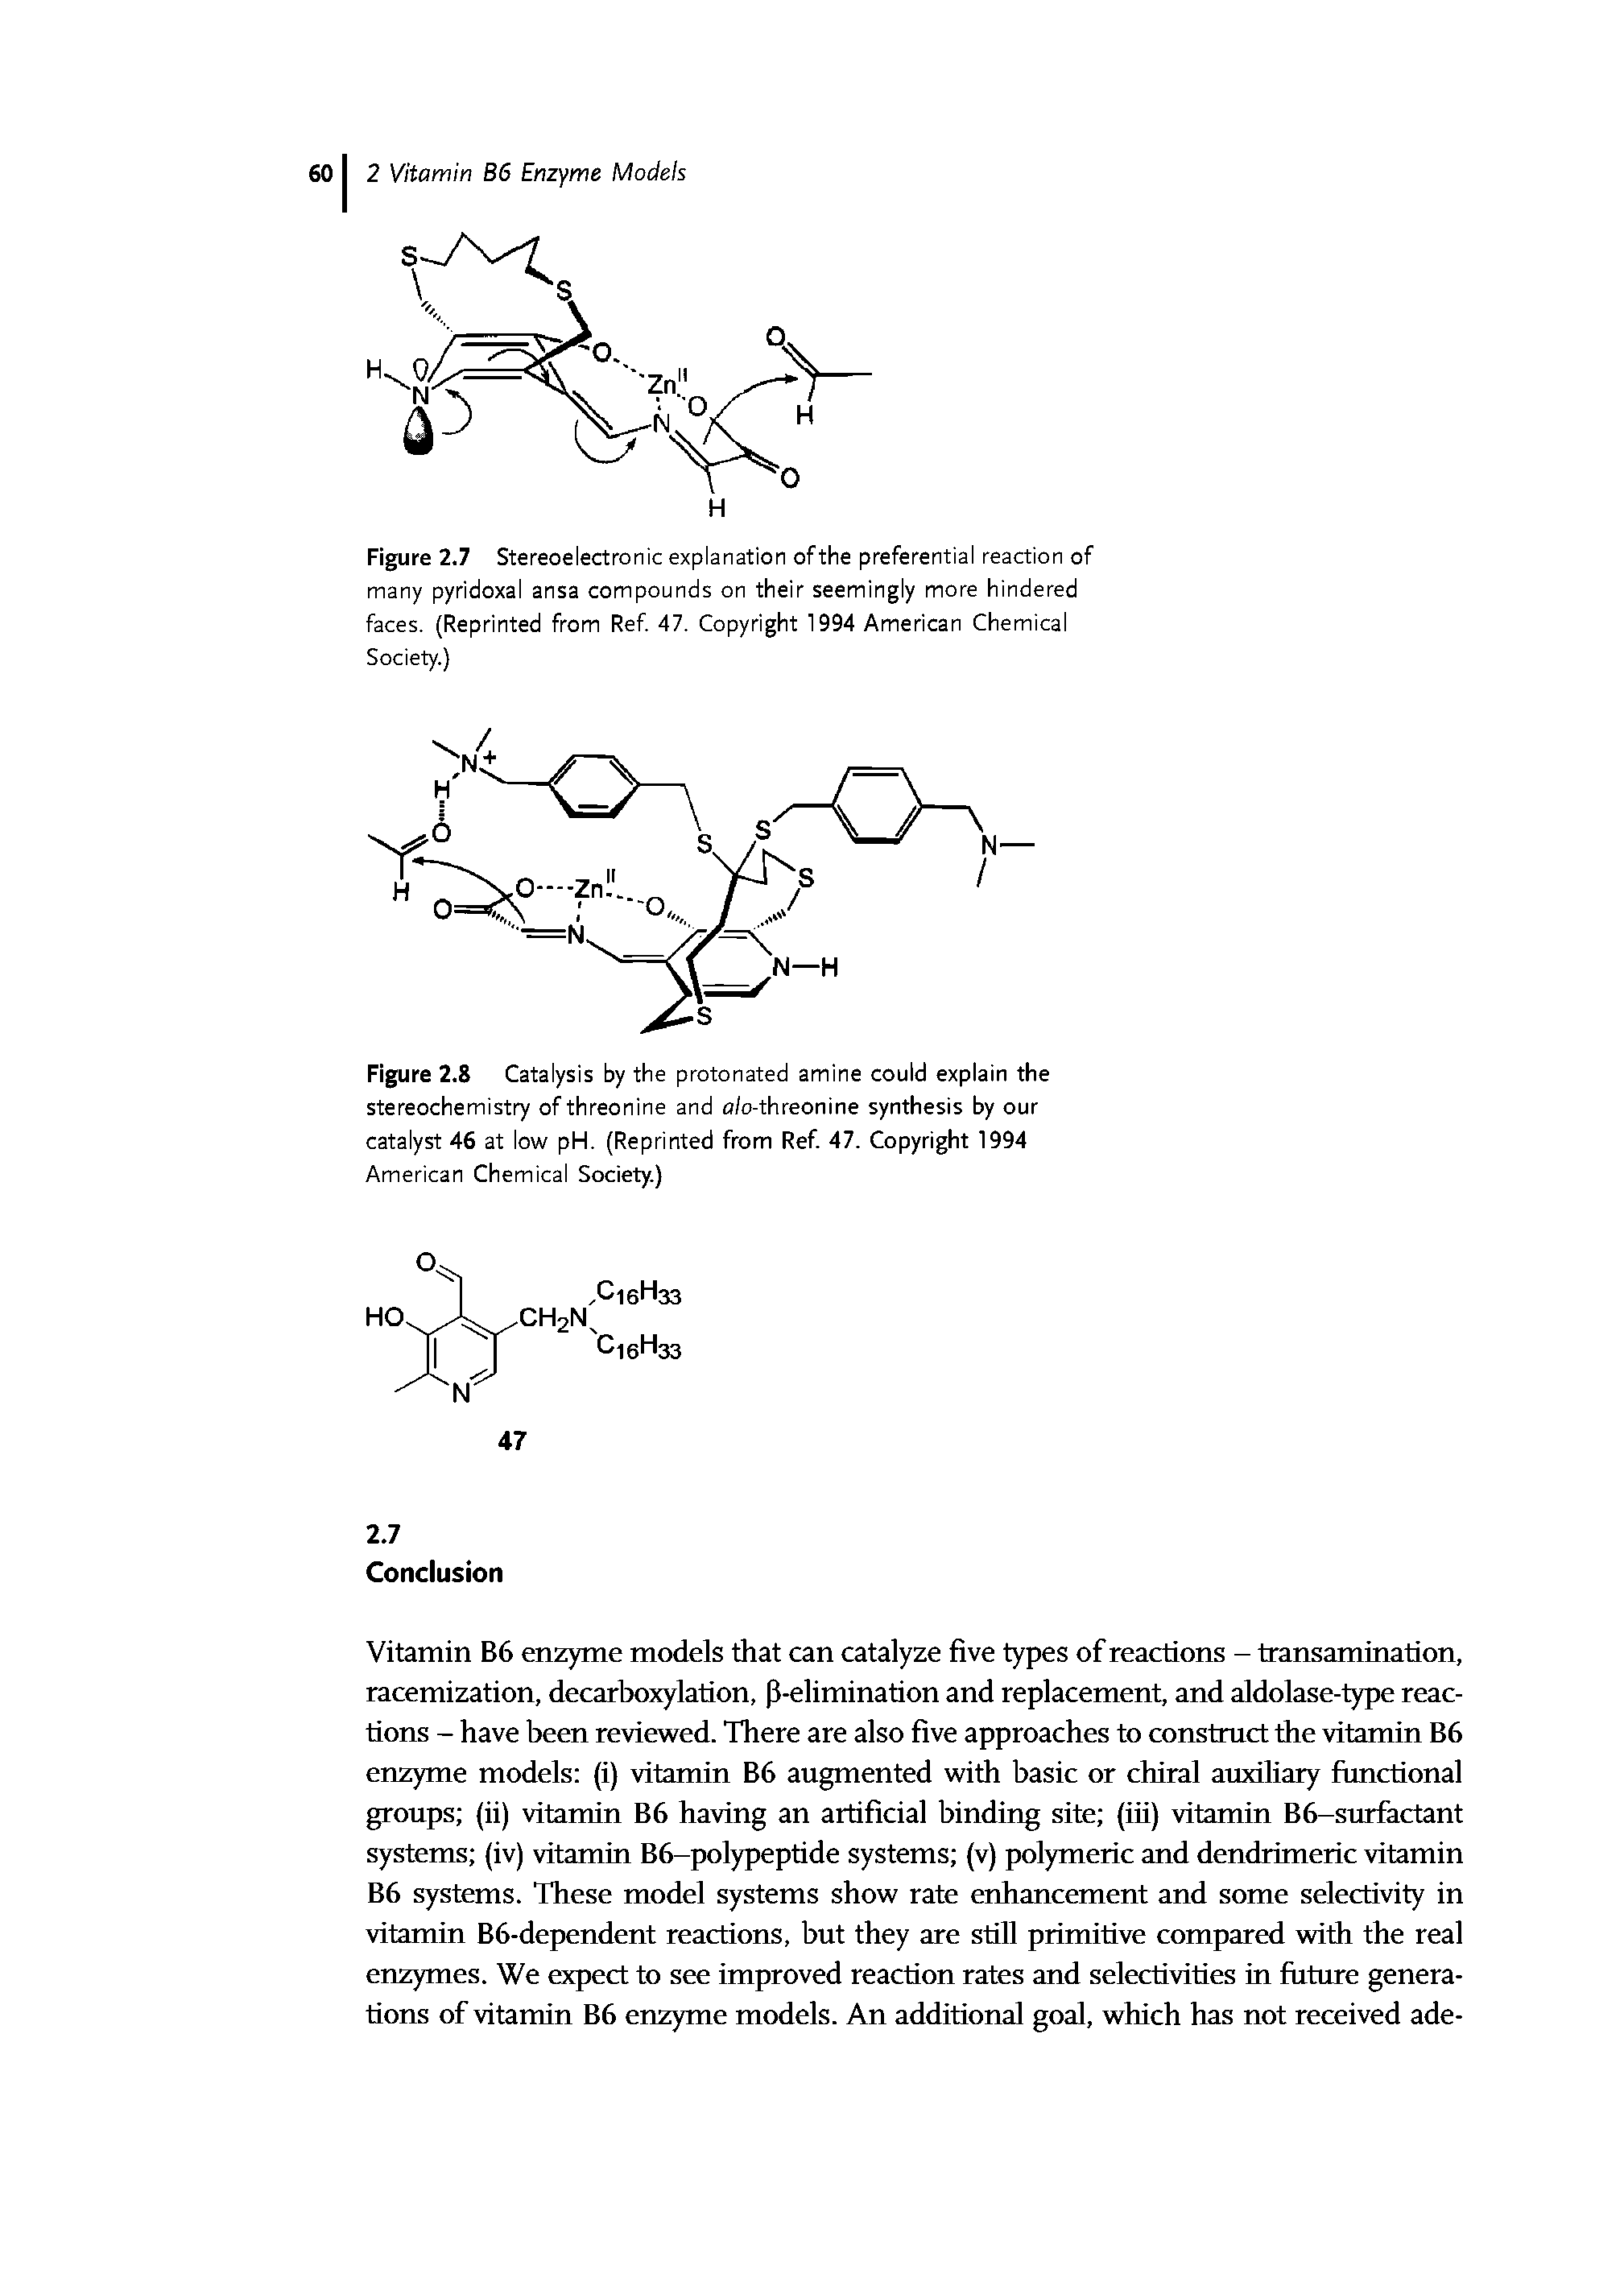 Figure 2.8 Catalysis by the protonated amine could explain the stereochemistry of threonine and 0/0-threonine synthesis by our catalyst 46 at low pH. (Reprinted from Ref. 47. Copyright 1994 American Chemical Society.)...